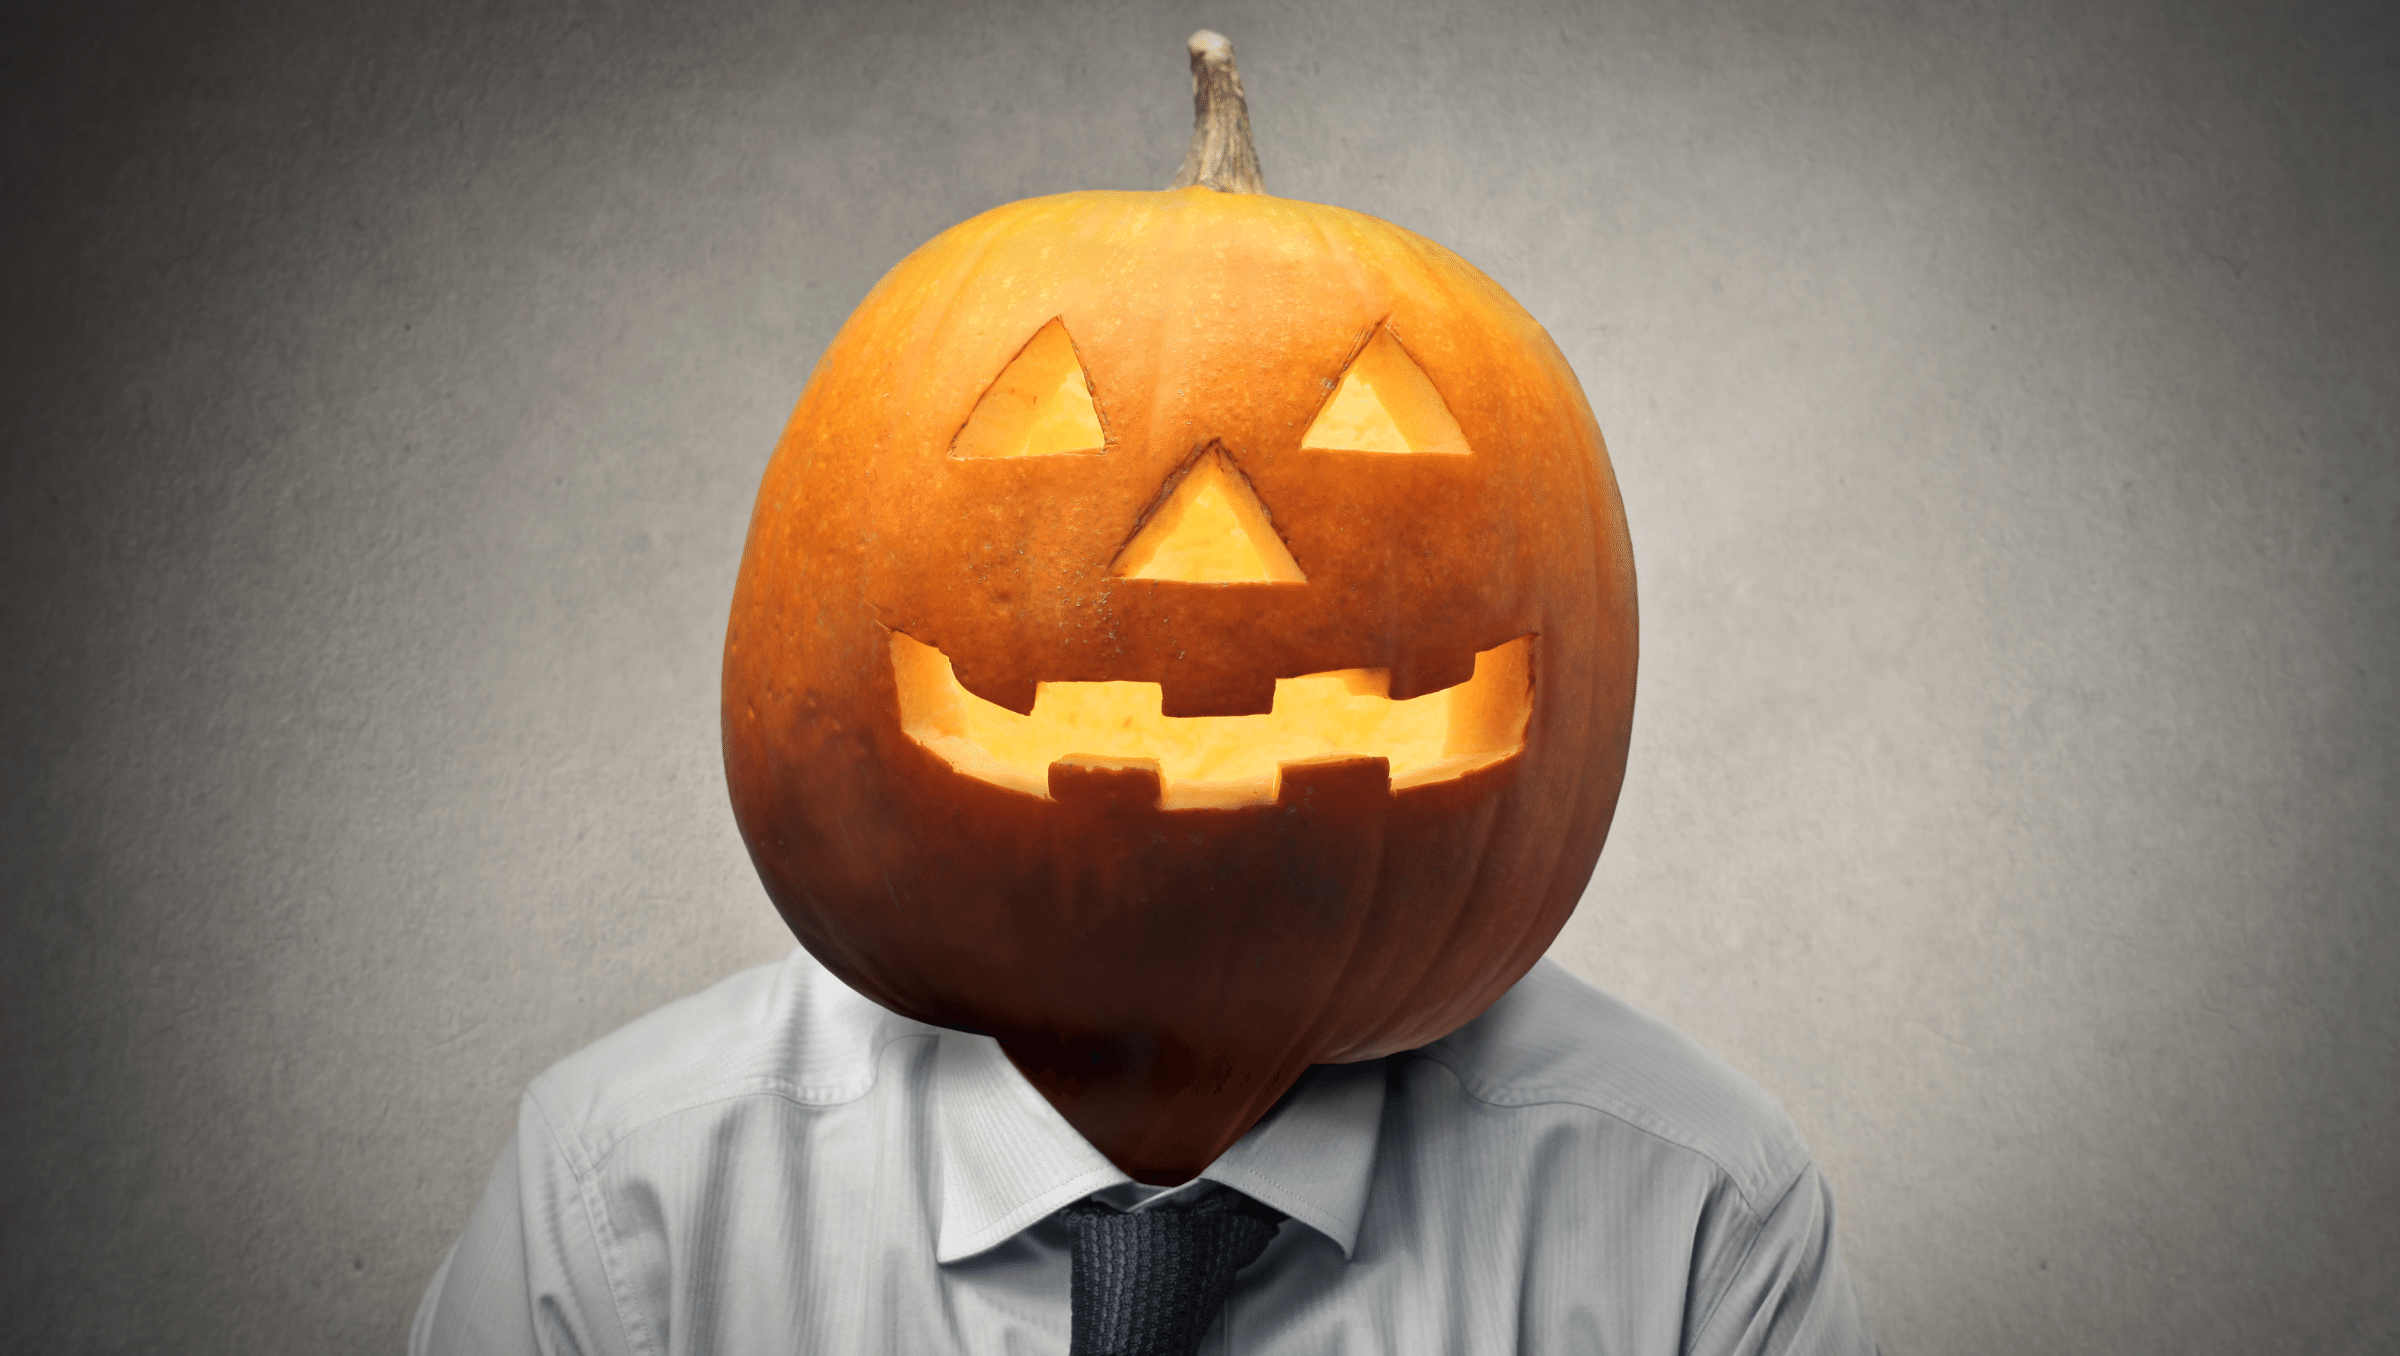 4 More Halloween-Based Marketing Ideas For Small Businesses